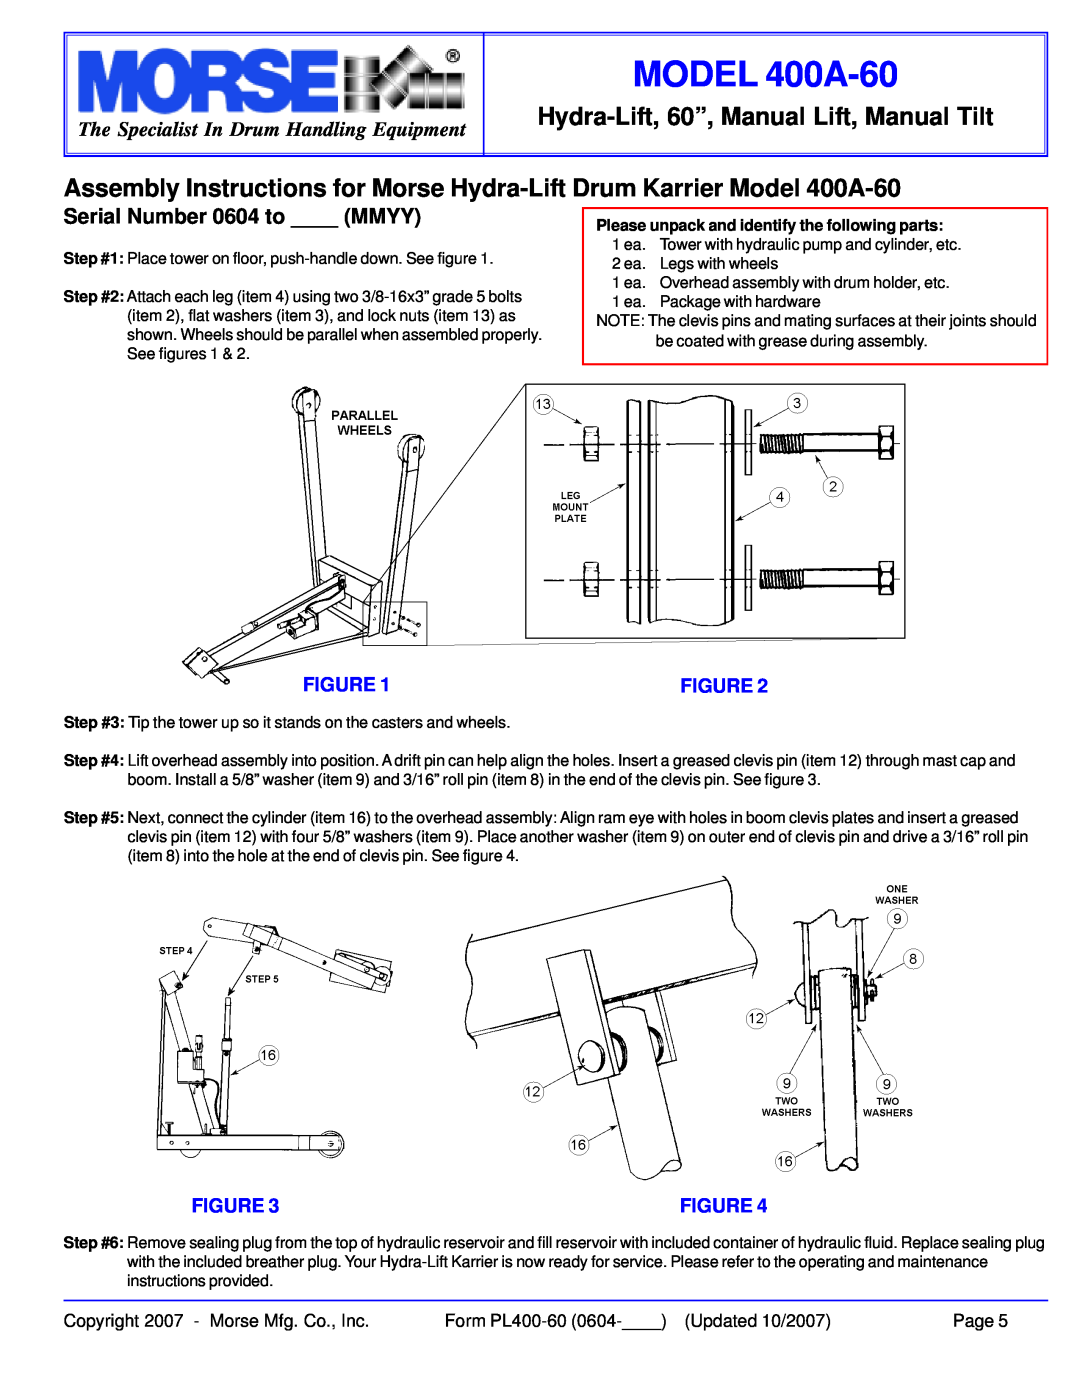 HydroSurge warranty Assembly Instructions for Morse Hydra-Lift Drum Karrier Model 400A-60, MODEL 400A-60 